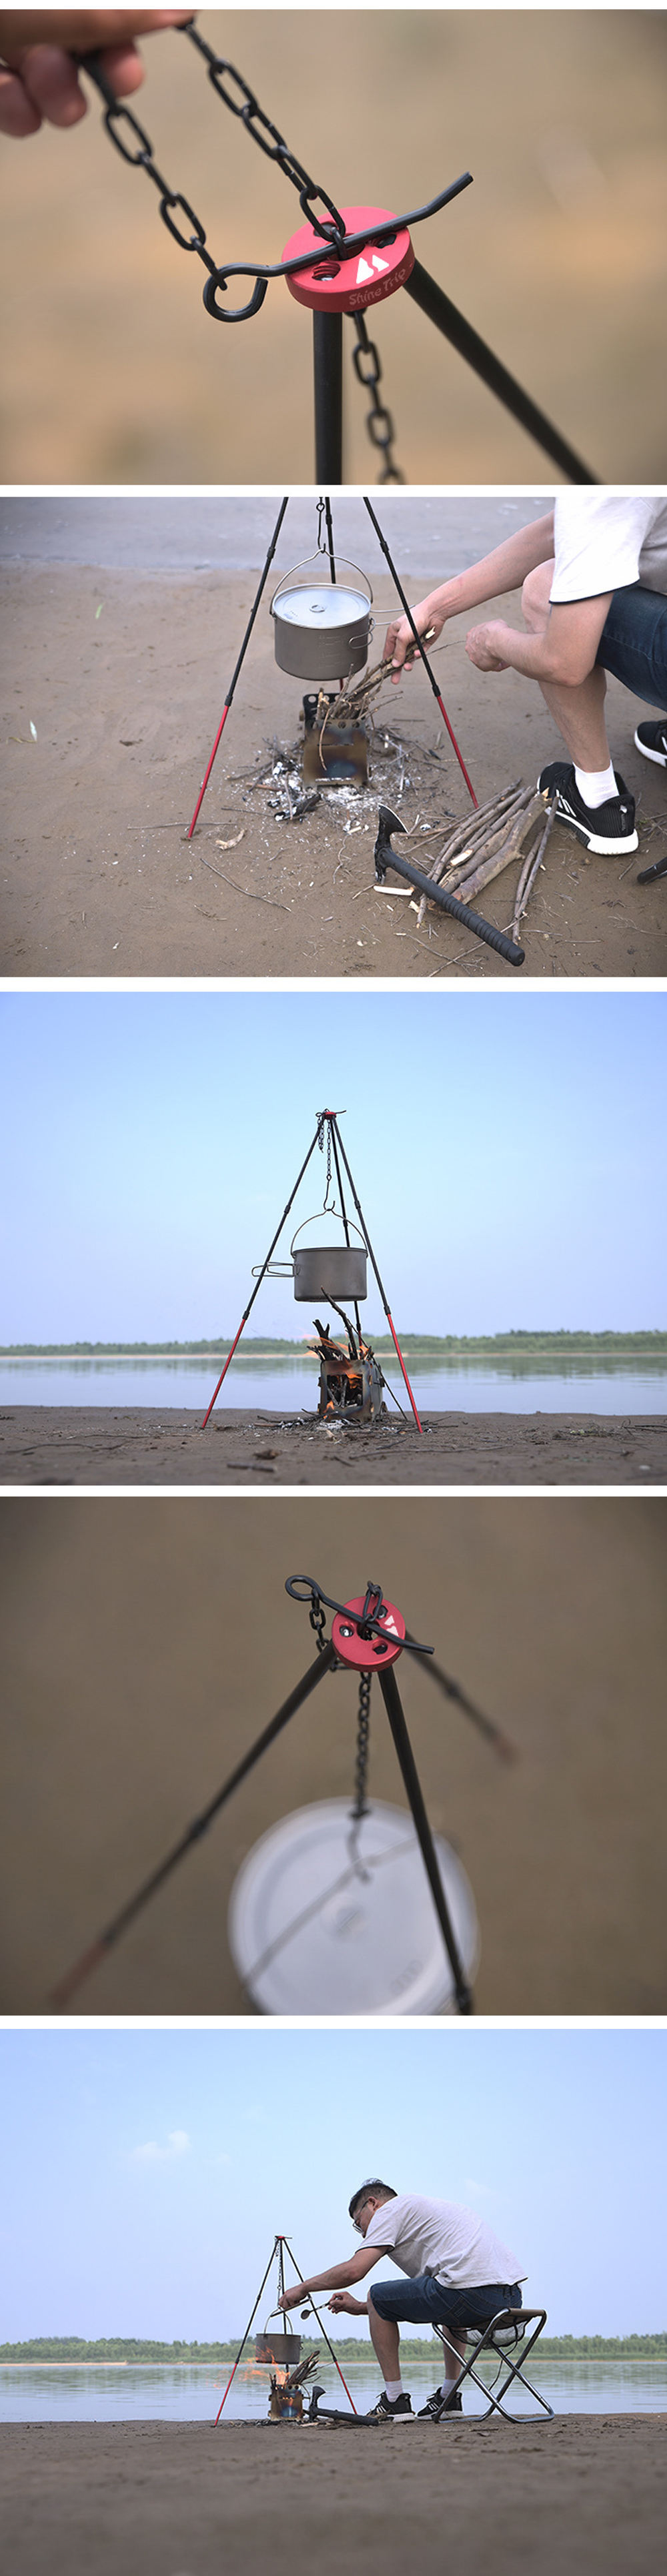 Multifunction-Camping-BBQ-Tripod-Bonfire-Portable-Hanging-Water-Jugs-Bracket-Detachable-Barbecue-Coo-1809449-2